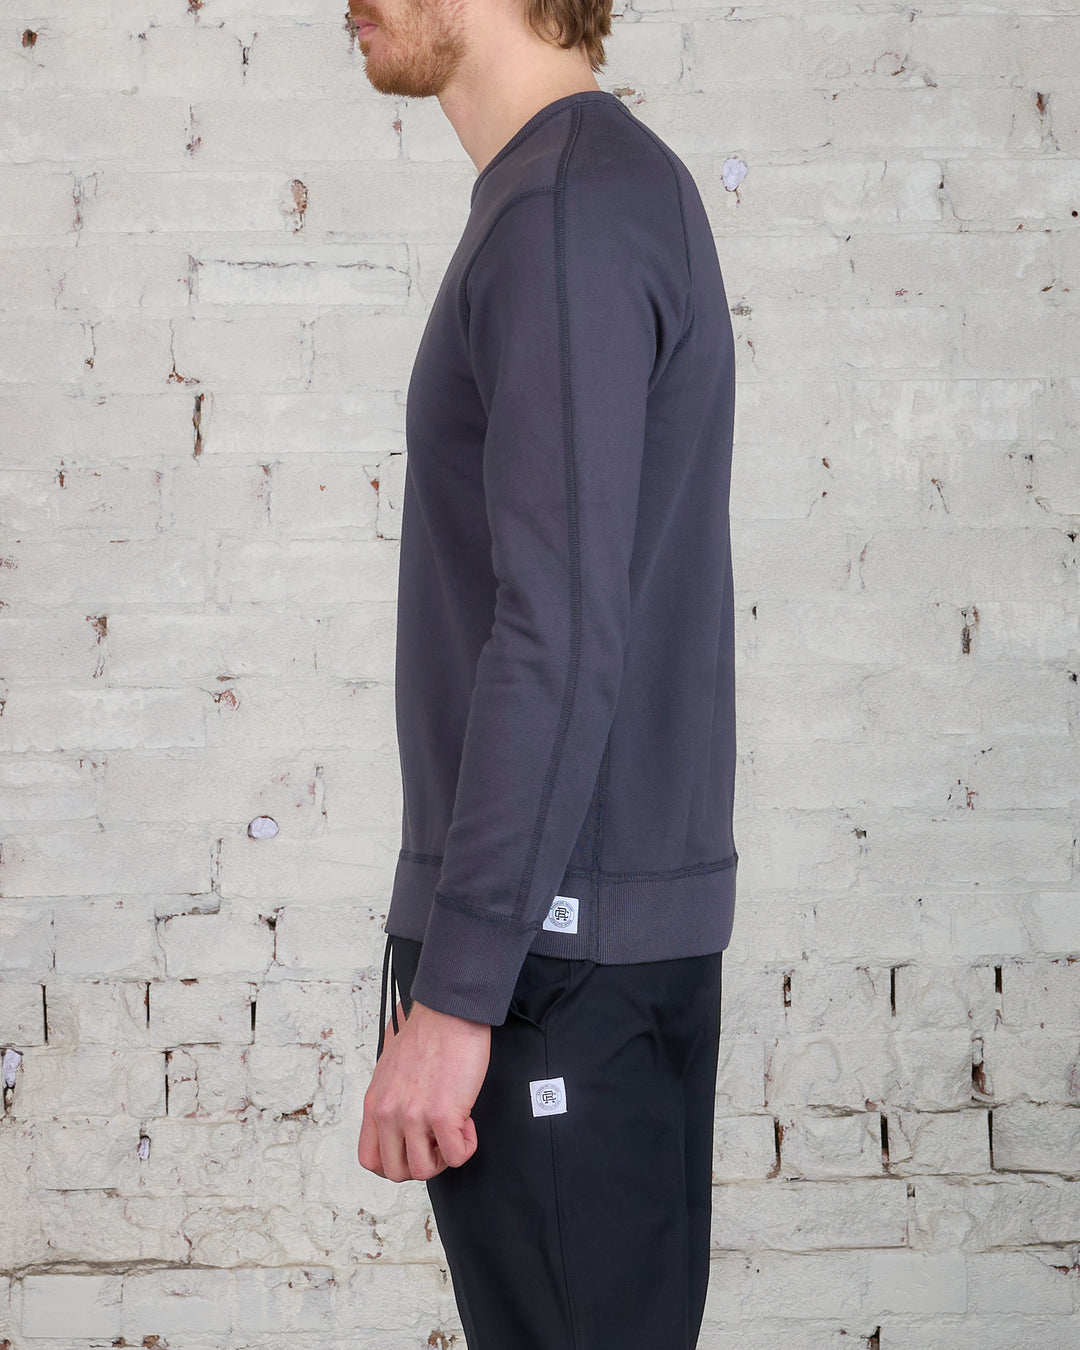 Reigning Champ Midweight Terry Crewneck Midnight